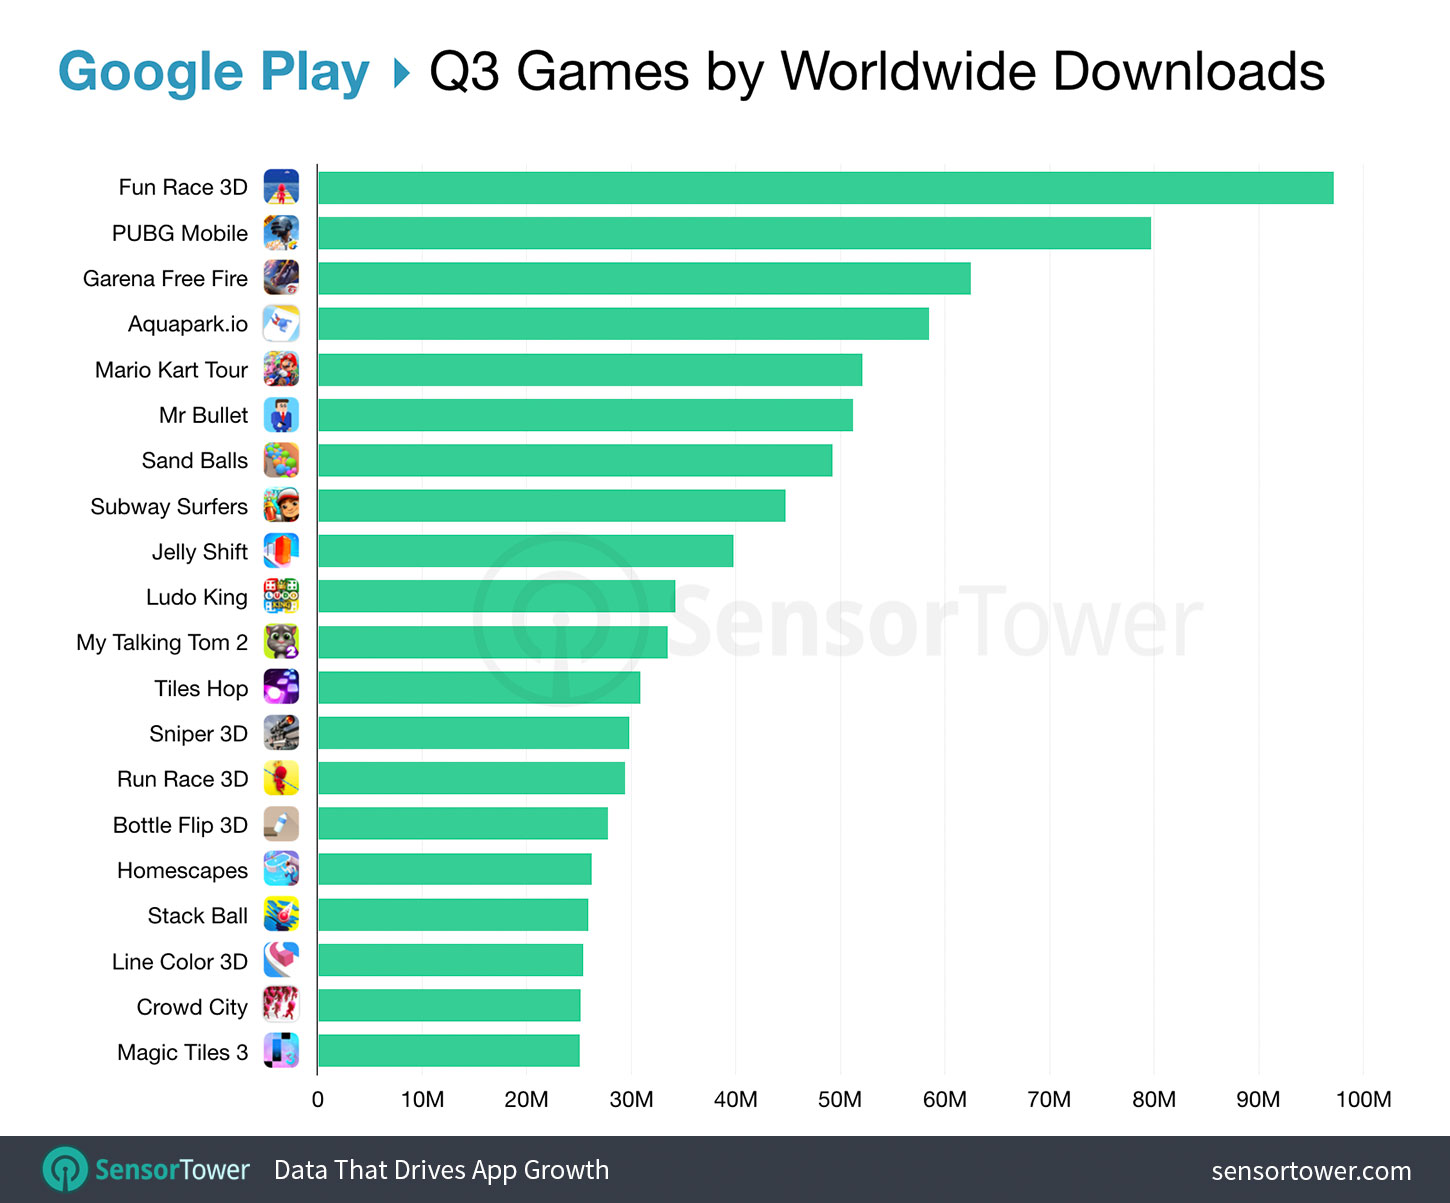 Top Google Play Mobile Games Worldwide for Q3 2019